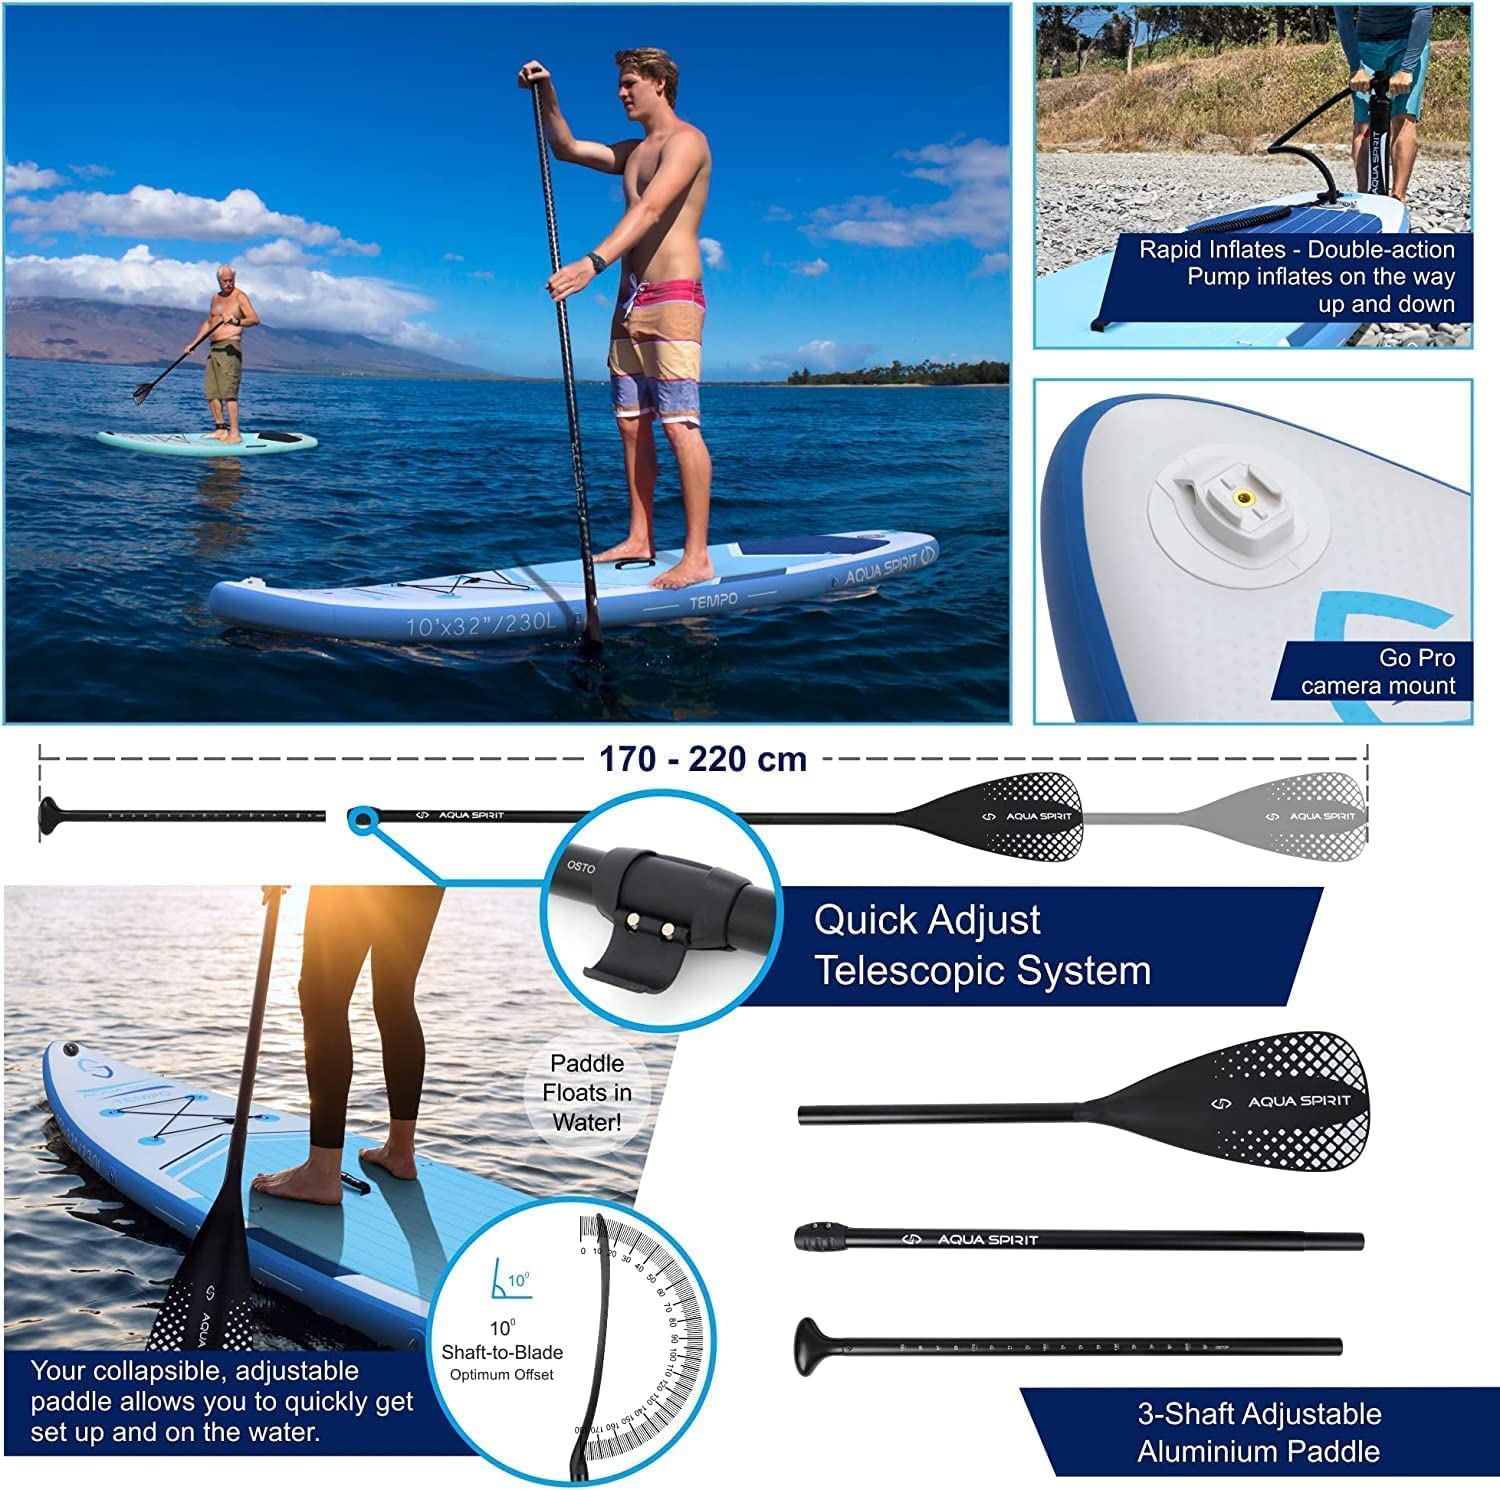 Aqua Spirit Tempo 10' Isup Inflatable Stand Up Paddle Board For Adult Beginners/intermediate With Backpack, Leash, Paddle, Changing Mat & Waterproof Phone Case, All-Inclusive Package, 3-Years Of Complete Brand Warranty - Aqua Spirit iSUPs